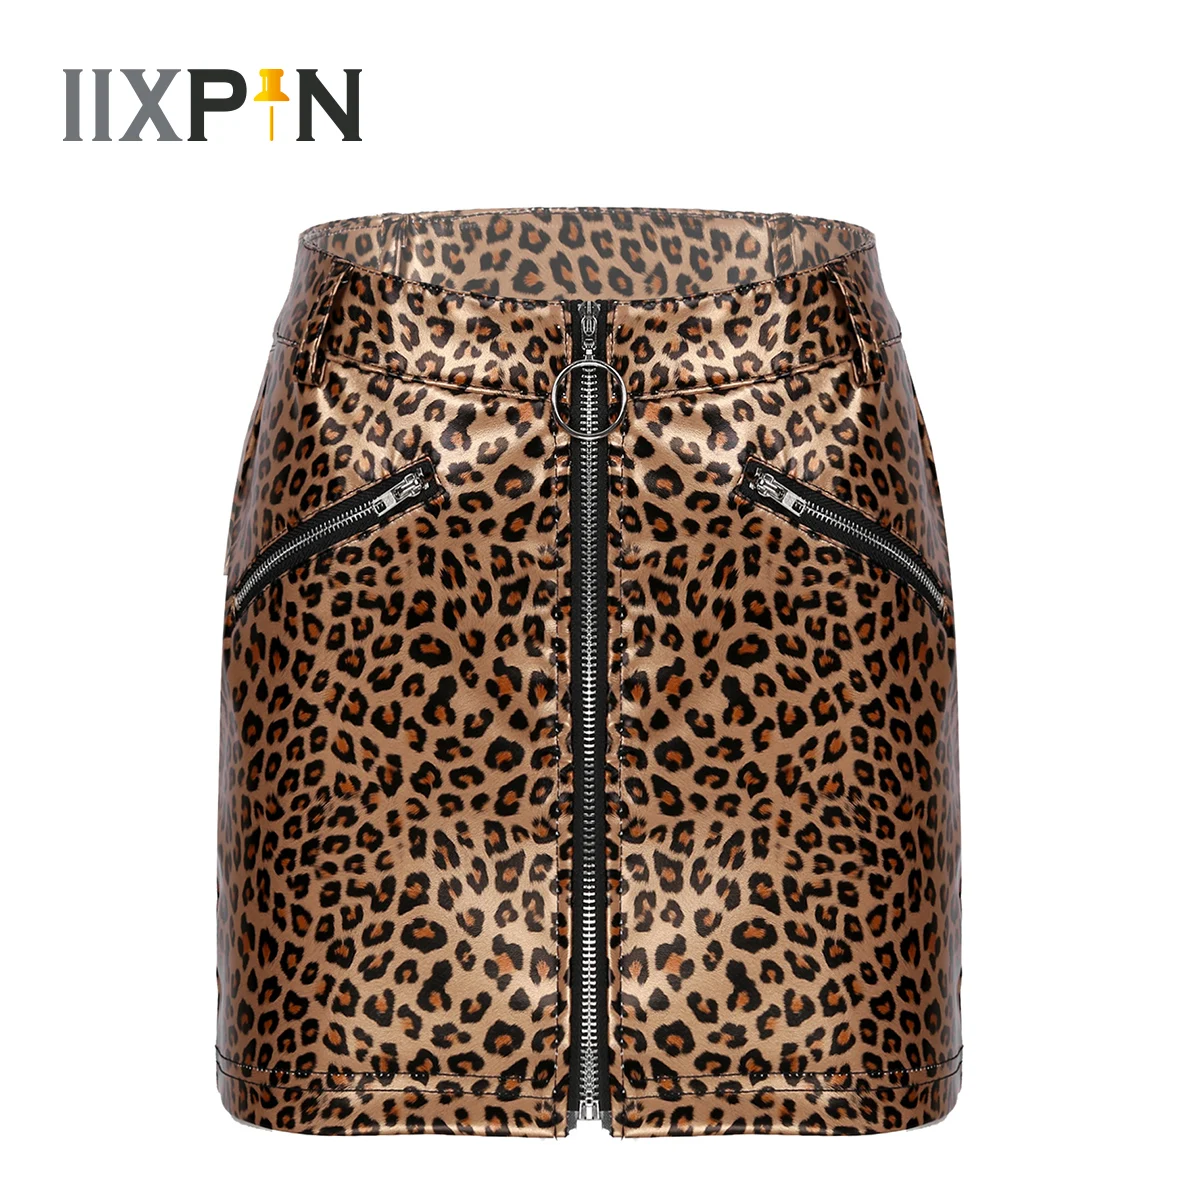 Faux Leather Leopard Sexy Mini Skirts for Women's Wetlook Fake Zipper Pockets Bodycon Miniskirt Fashion Cocktail Party Clubwear